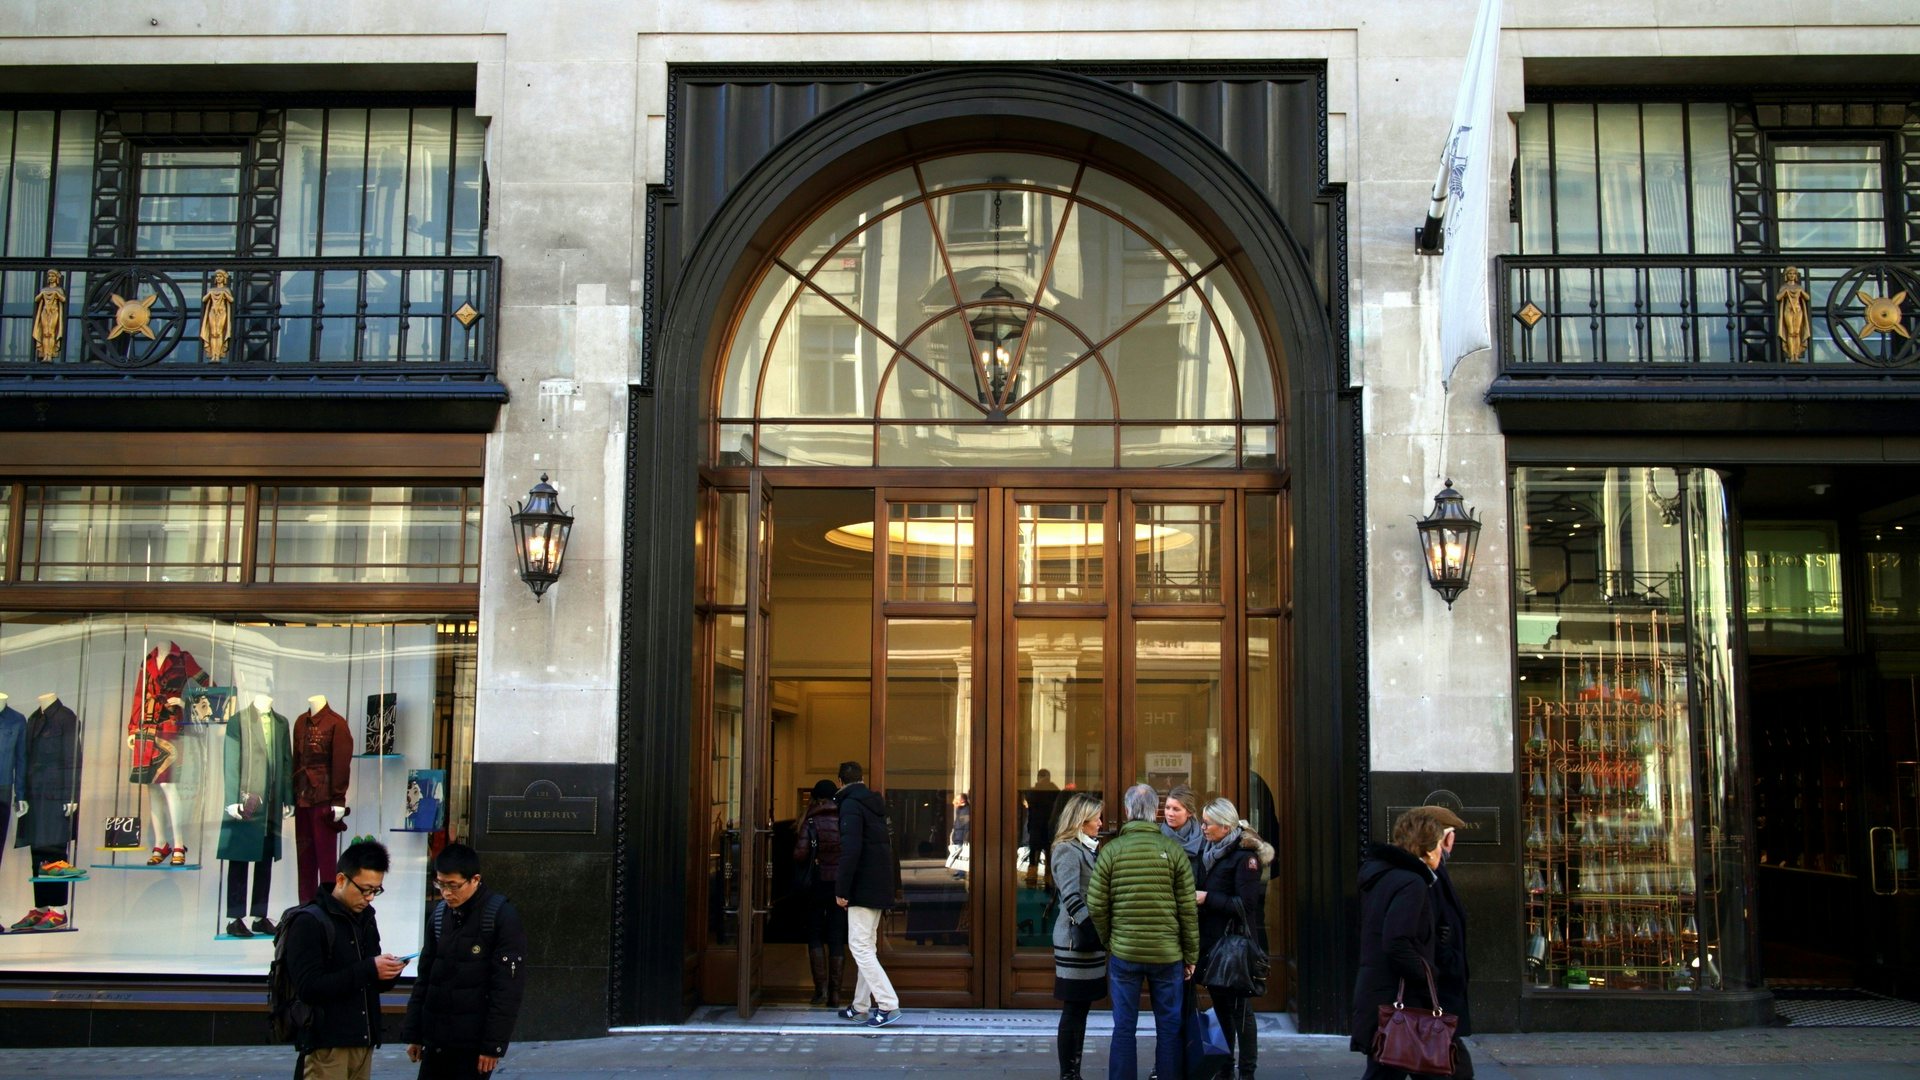 The Burberry flagship store on Regent Street in London. The majority of shoppers at this location are Chinese. Photo: Shutterstock